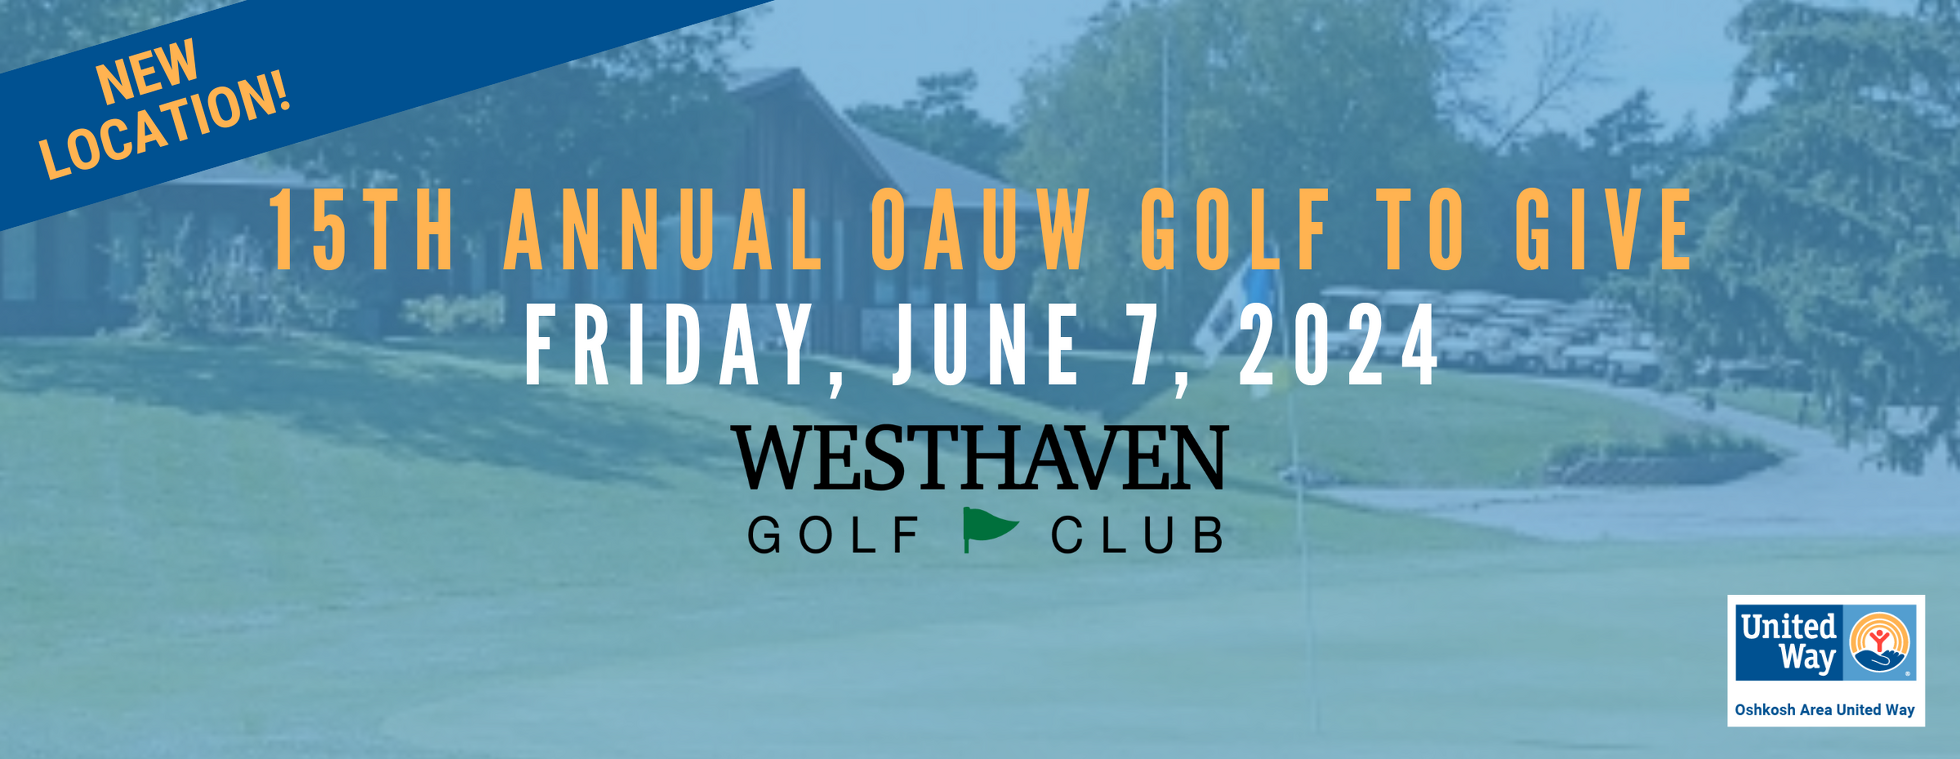 OAUW Golf to Give Charity Golf Outing